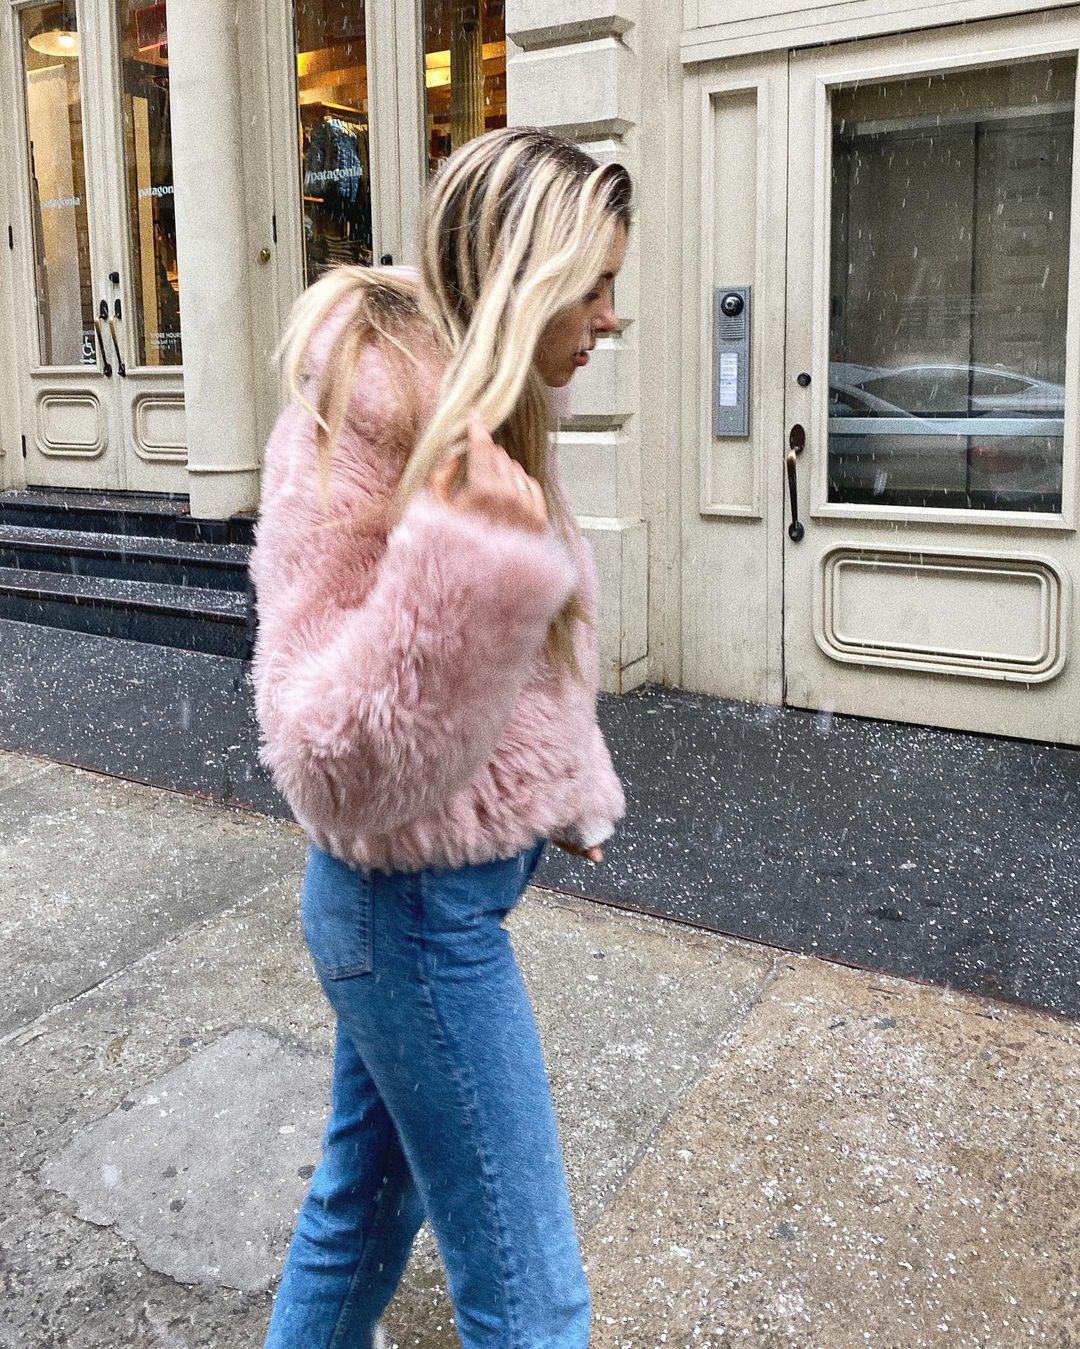 15 Faux Fur Jacket Outfits Will Never, How To Wear A Long Fur Coat With Jeans And